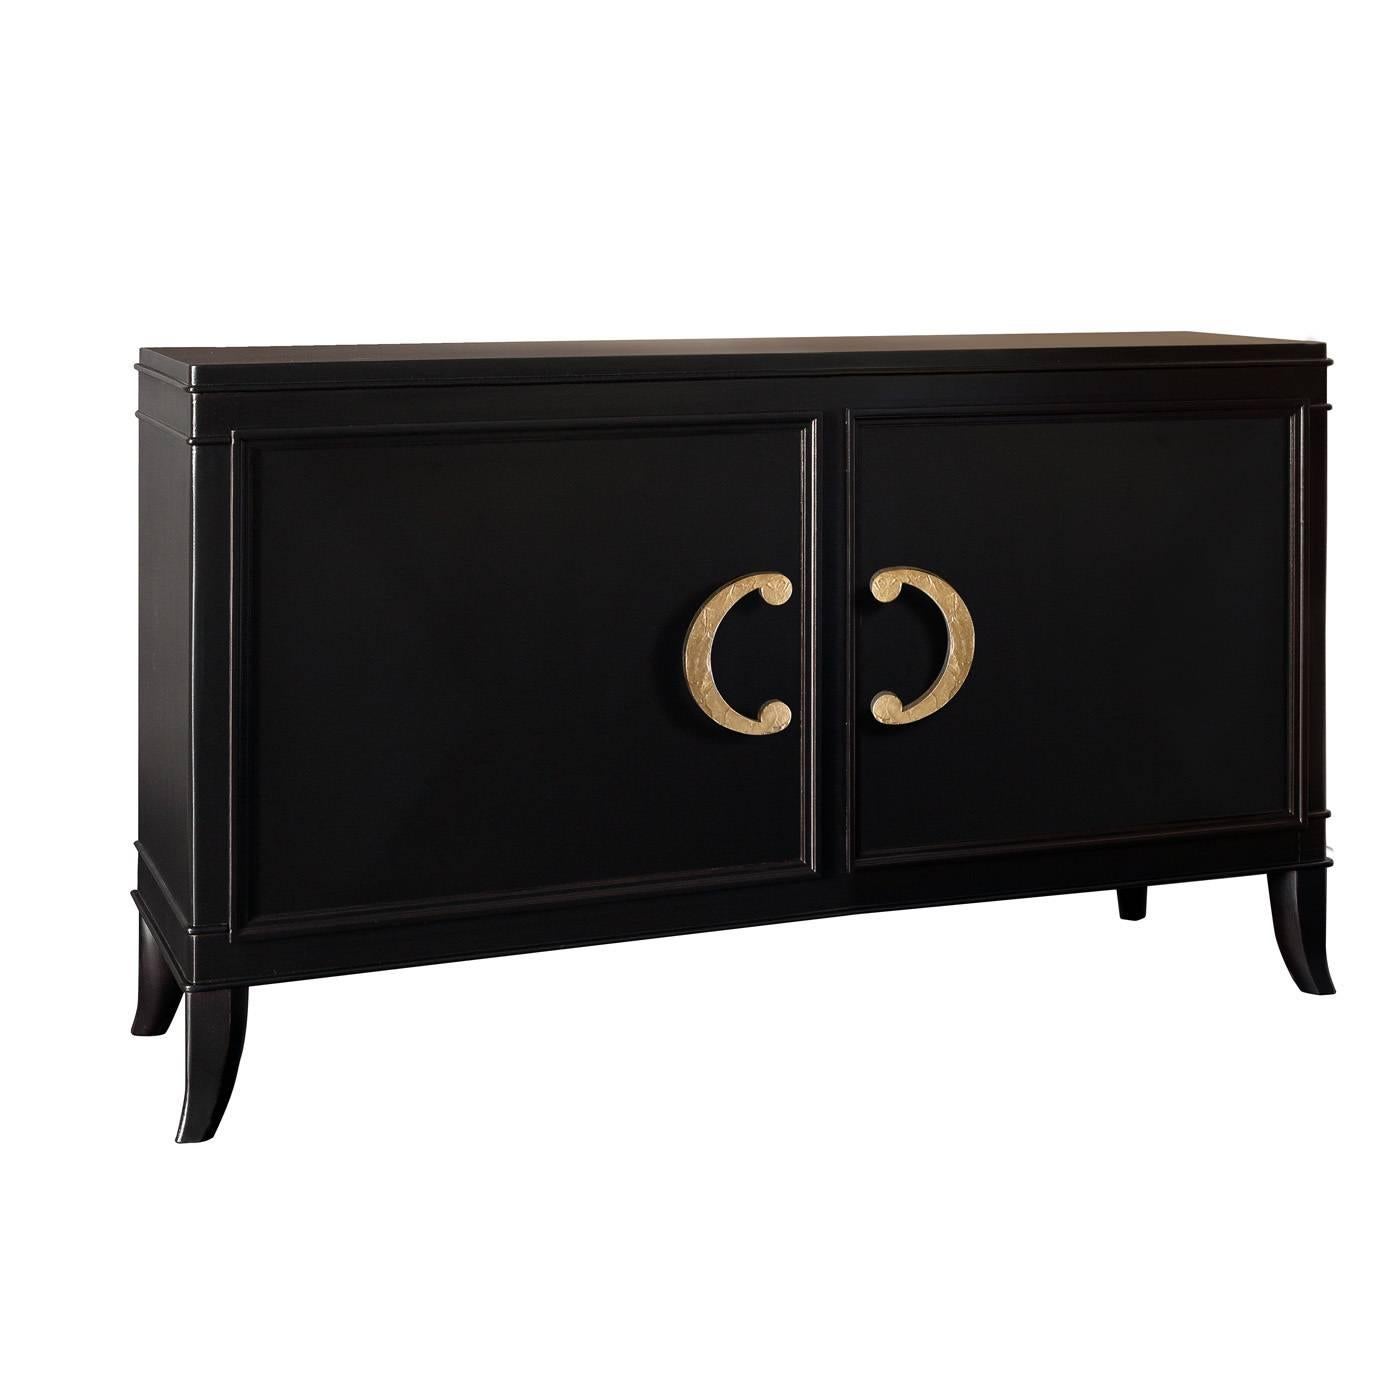 This two-door sideboard is the result of the finest Italian craftsmanship. Two elegant metal handles with the bright and intense effect of the hand-applied crinkled leaf, offer a subtly glamorous appeal. This piece, available in a dark mocha